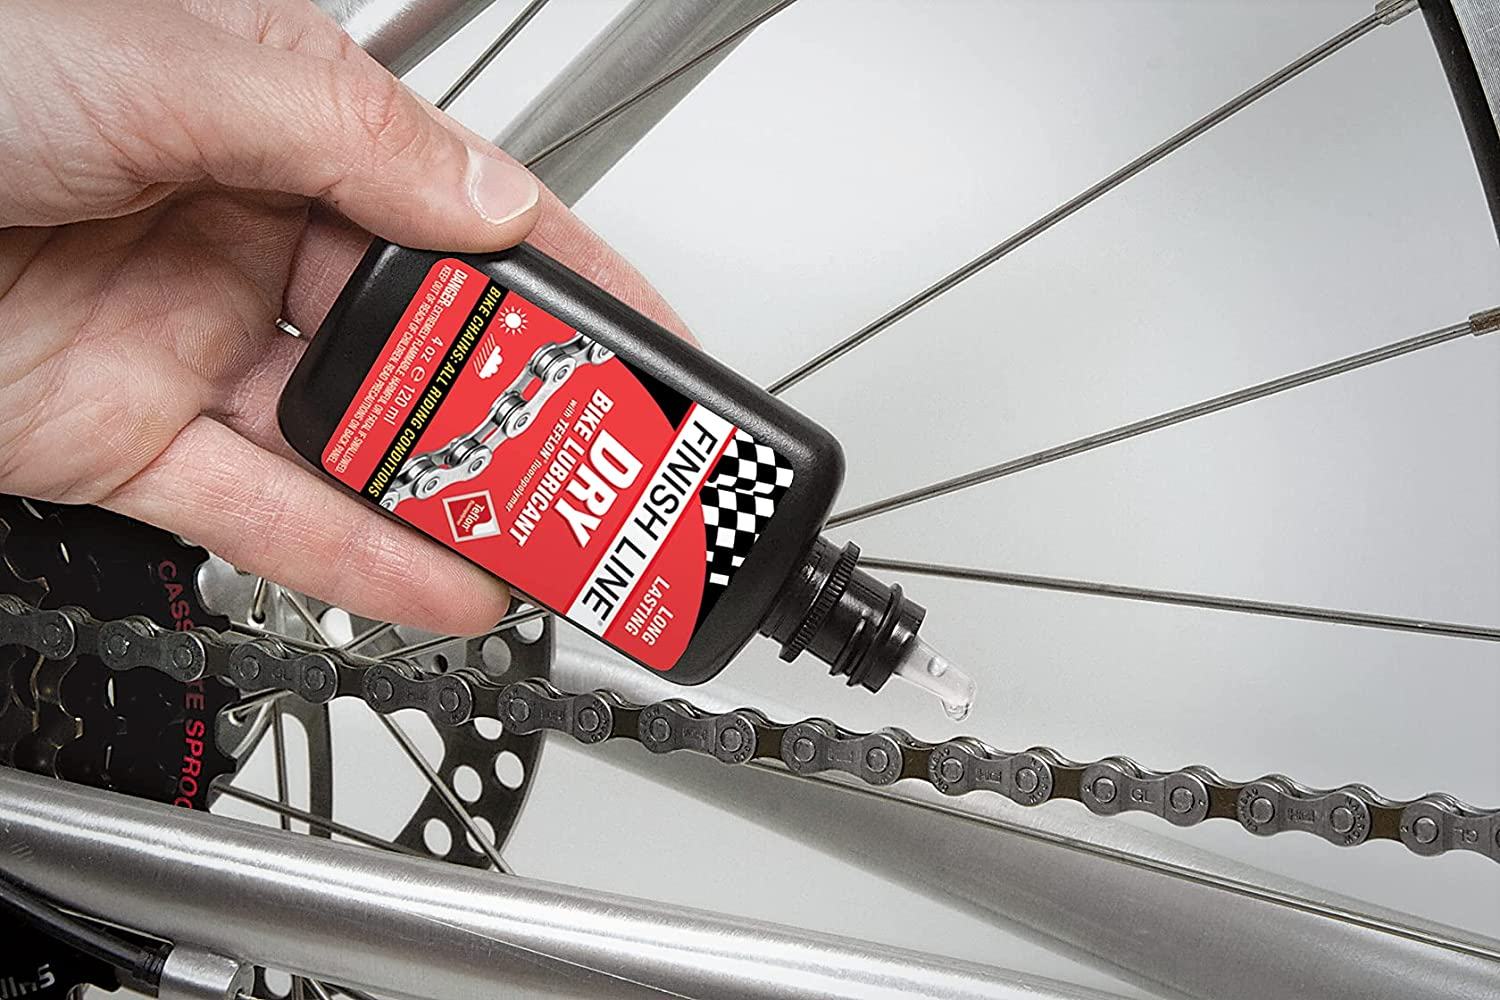 Make sure that the drivetrain parts are well lubricated before testing to see if your chain will shift to a low gear.